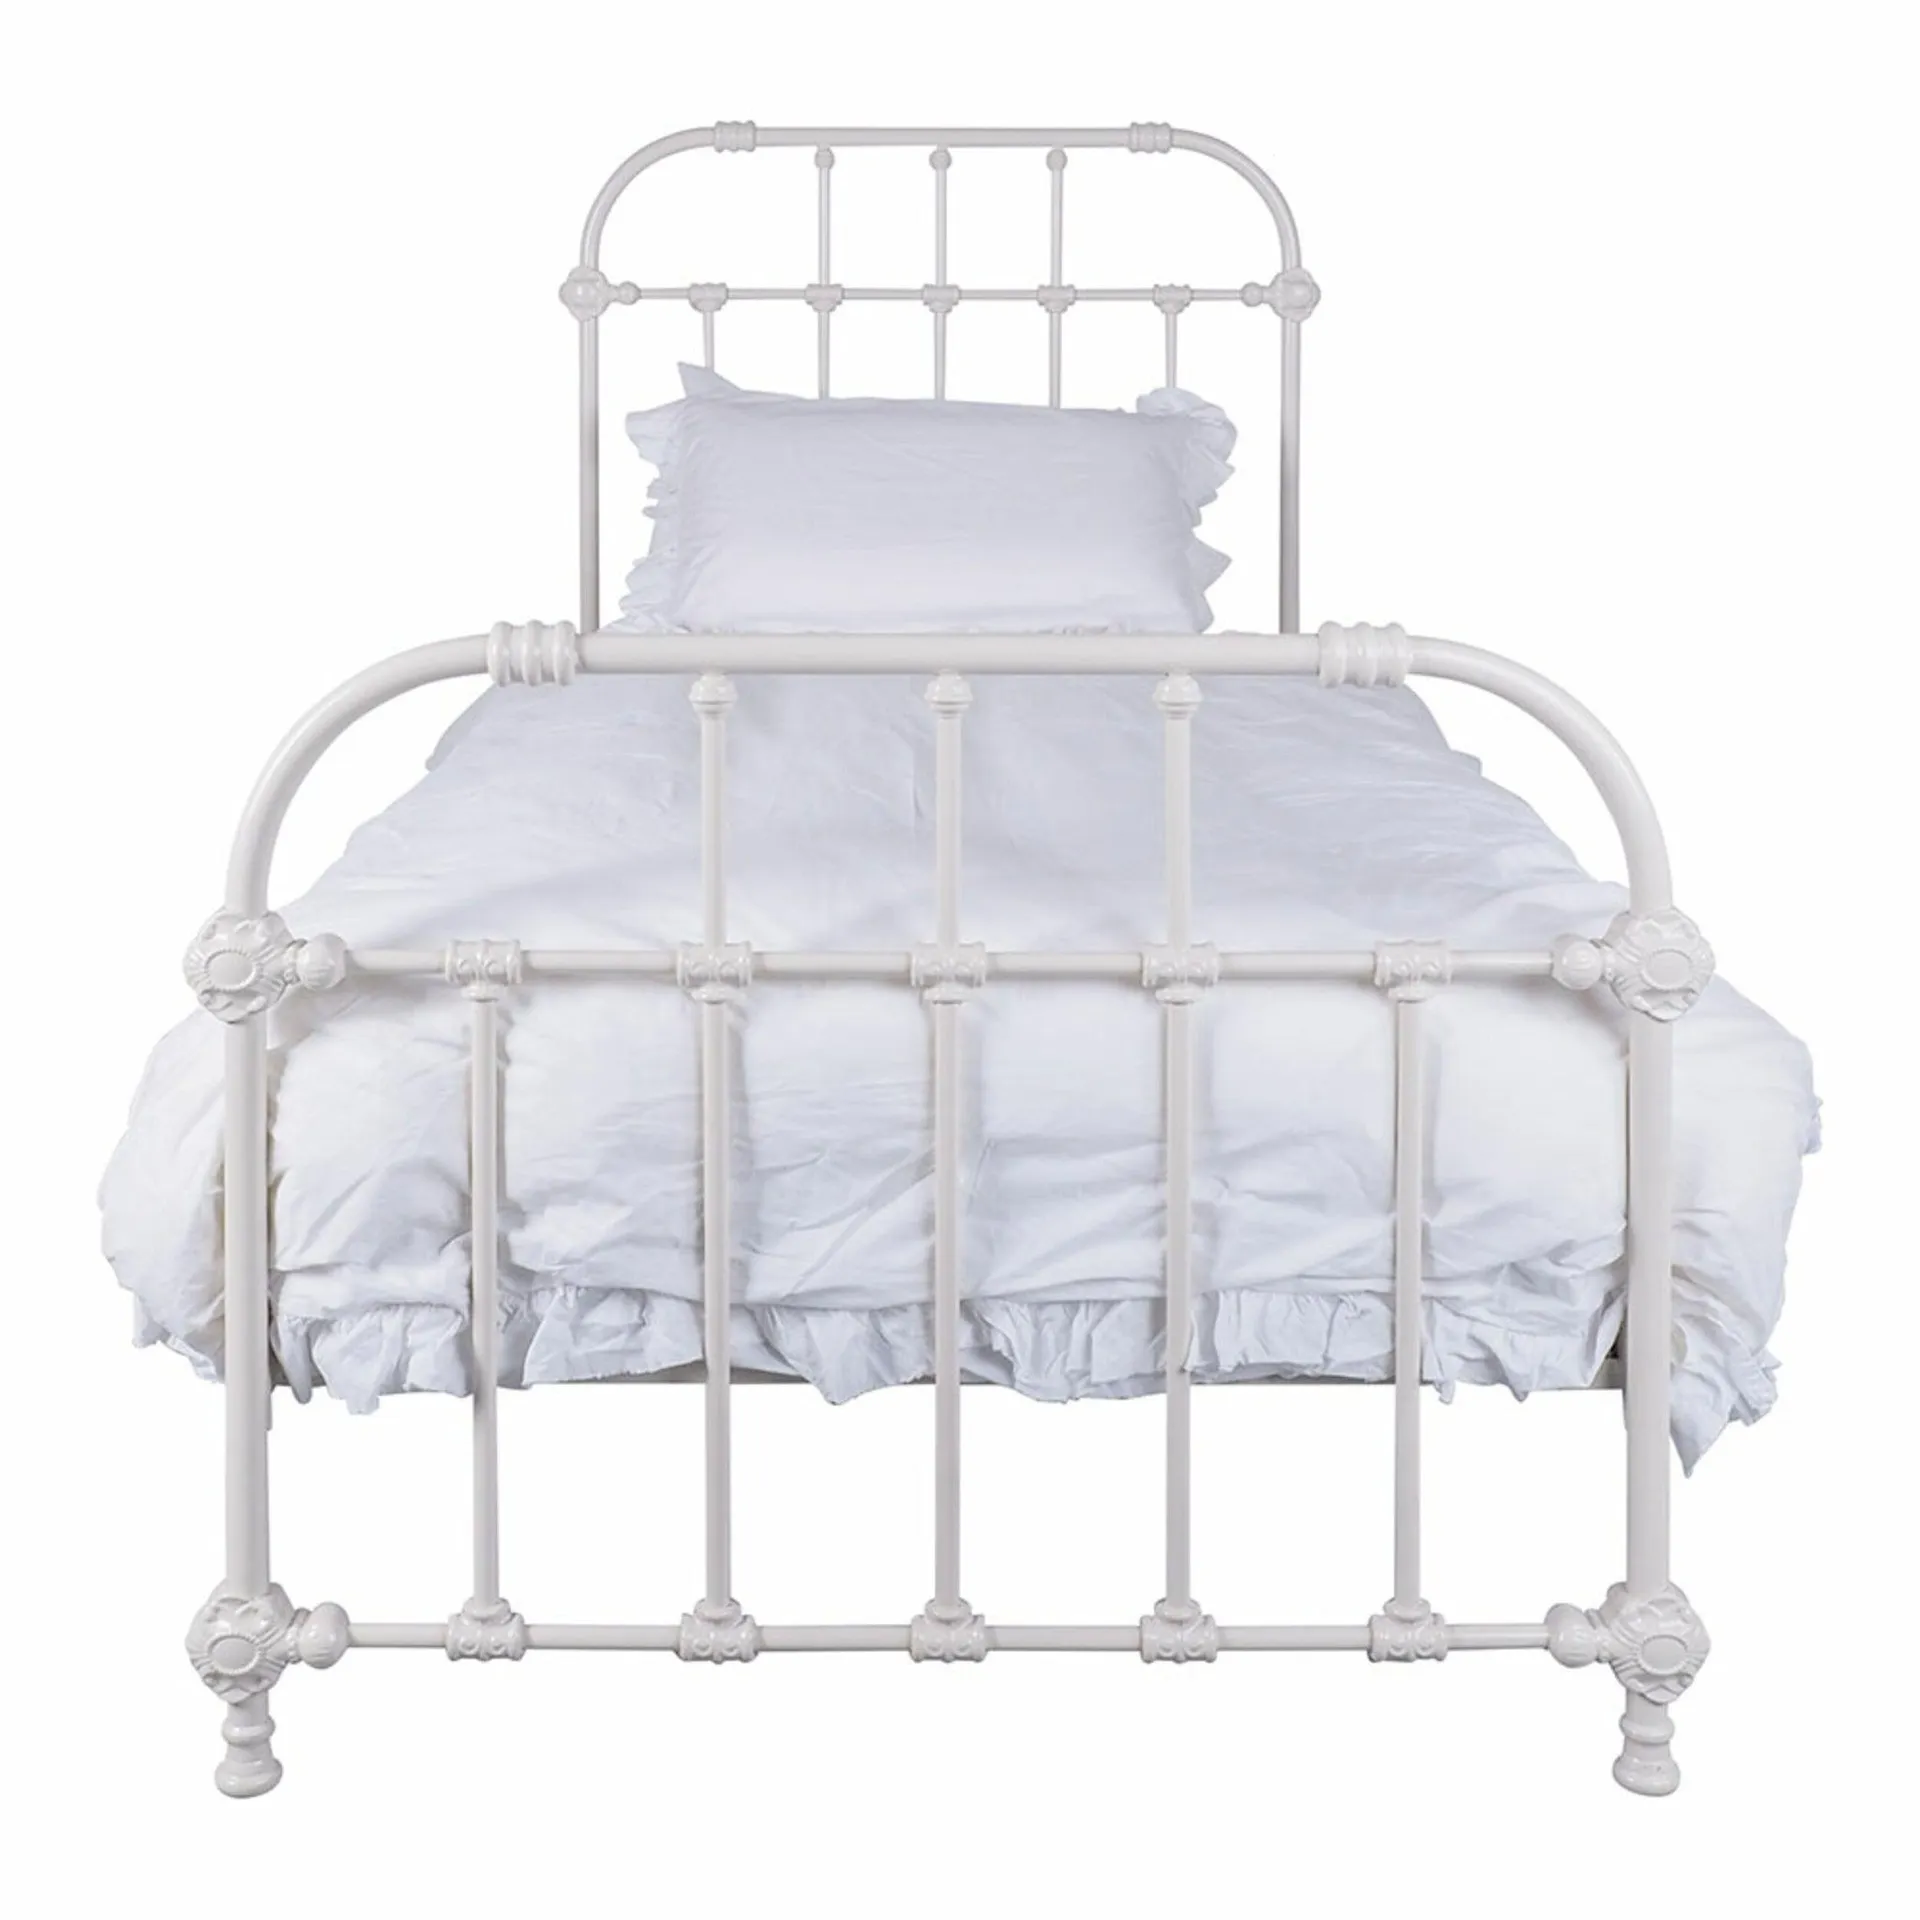 Manor King Single Bed White